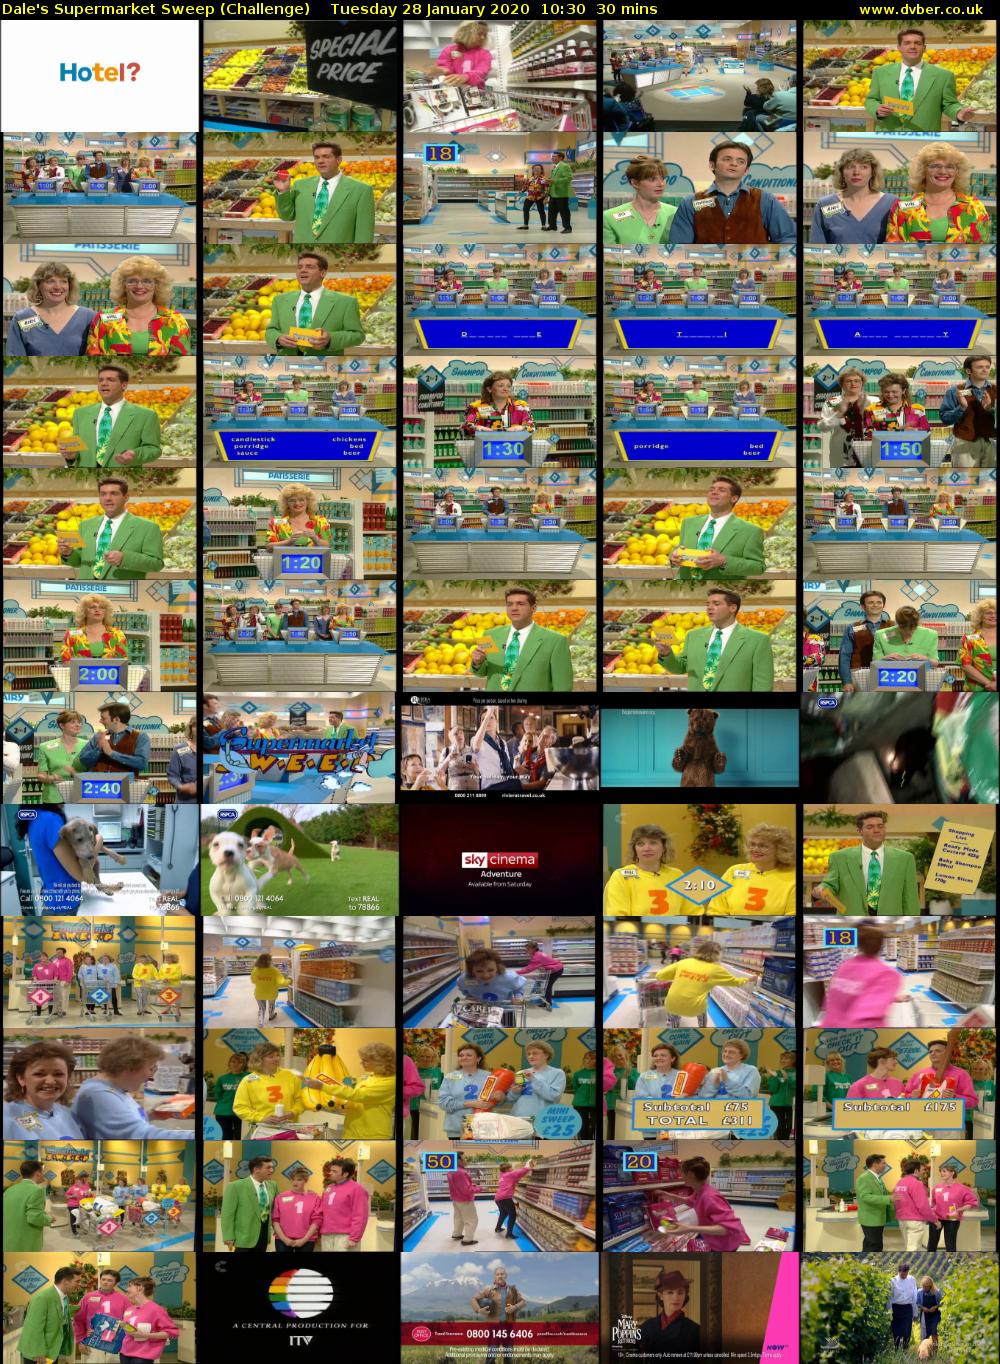 Dale's Supermarket Sweep (Challenge) Tuesday 28 January 2020 10:30 - 11:00